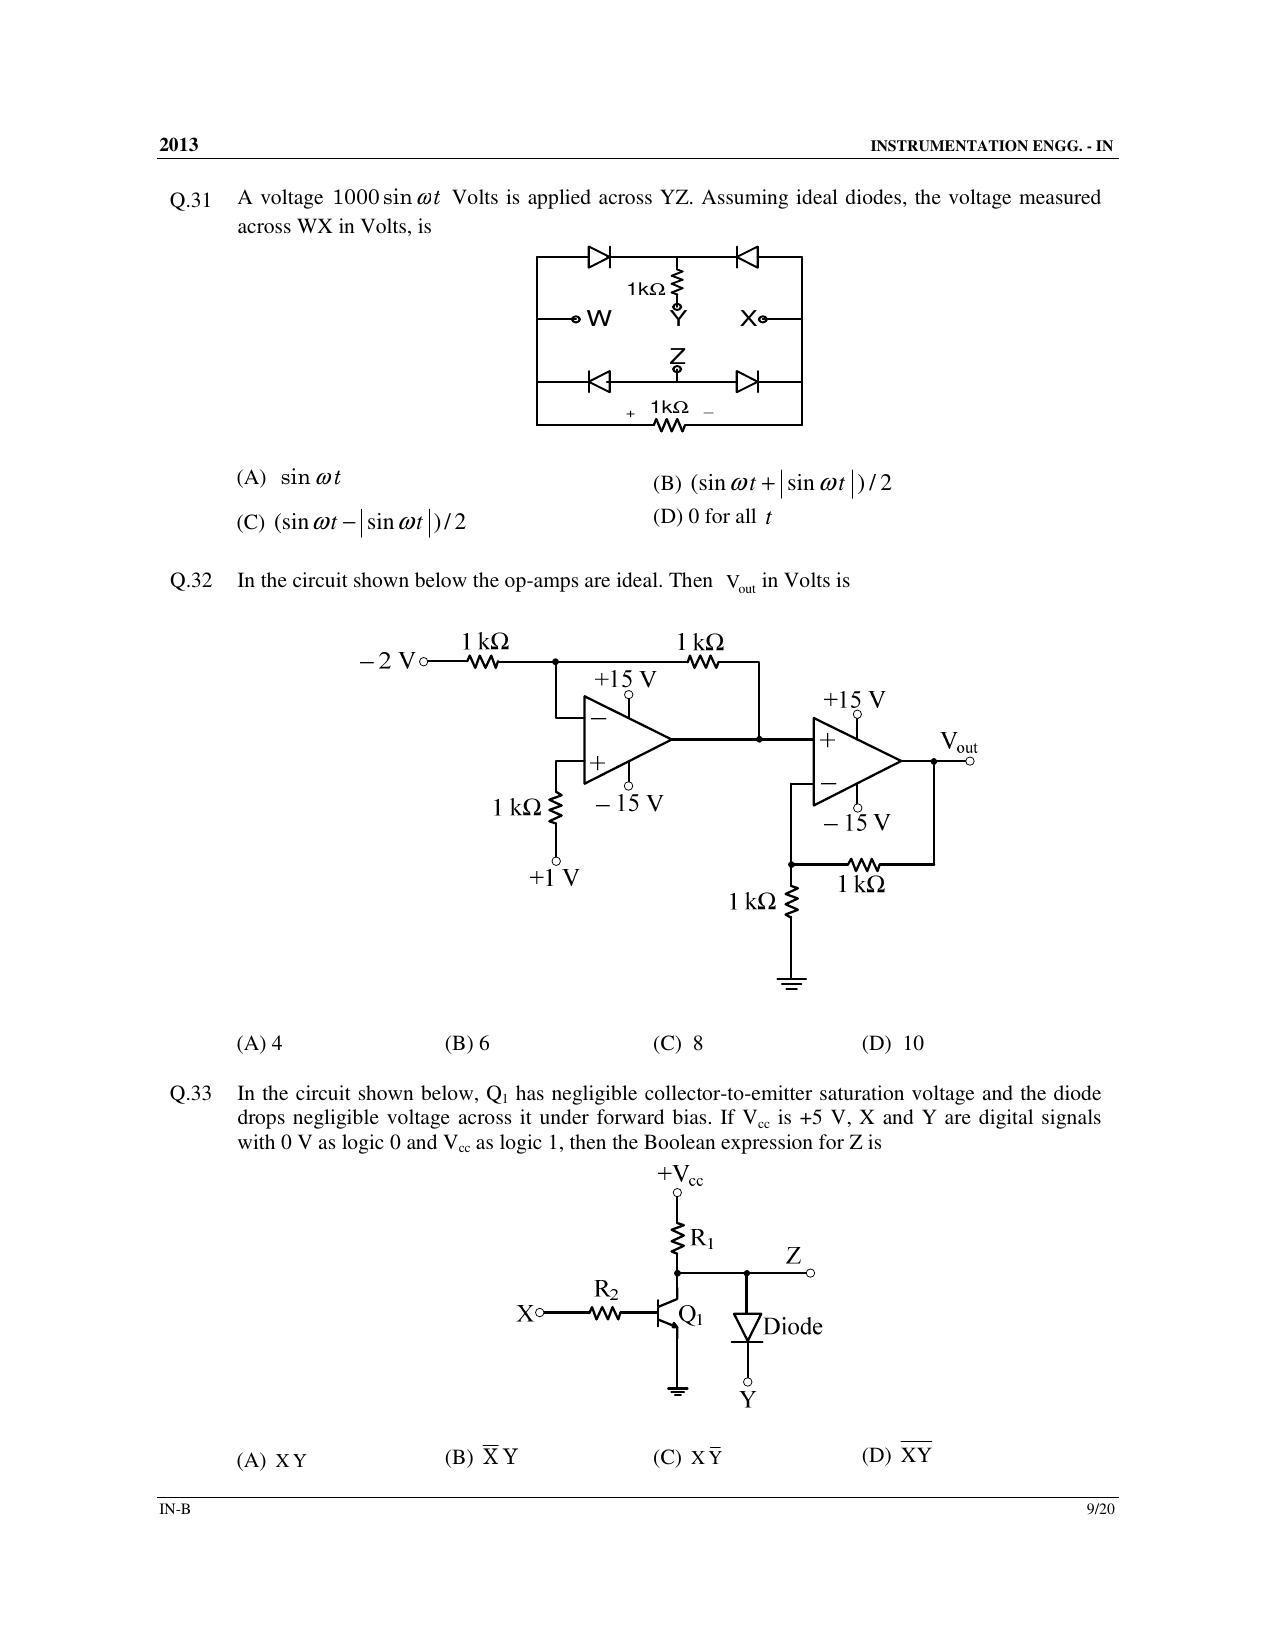 GATE 2013 Instrumentation Engineering (IN) Question Paper with Answer Key - Page 27